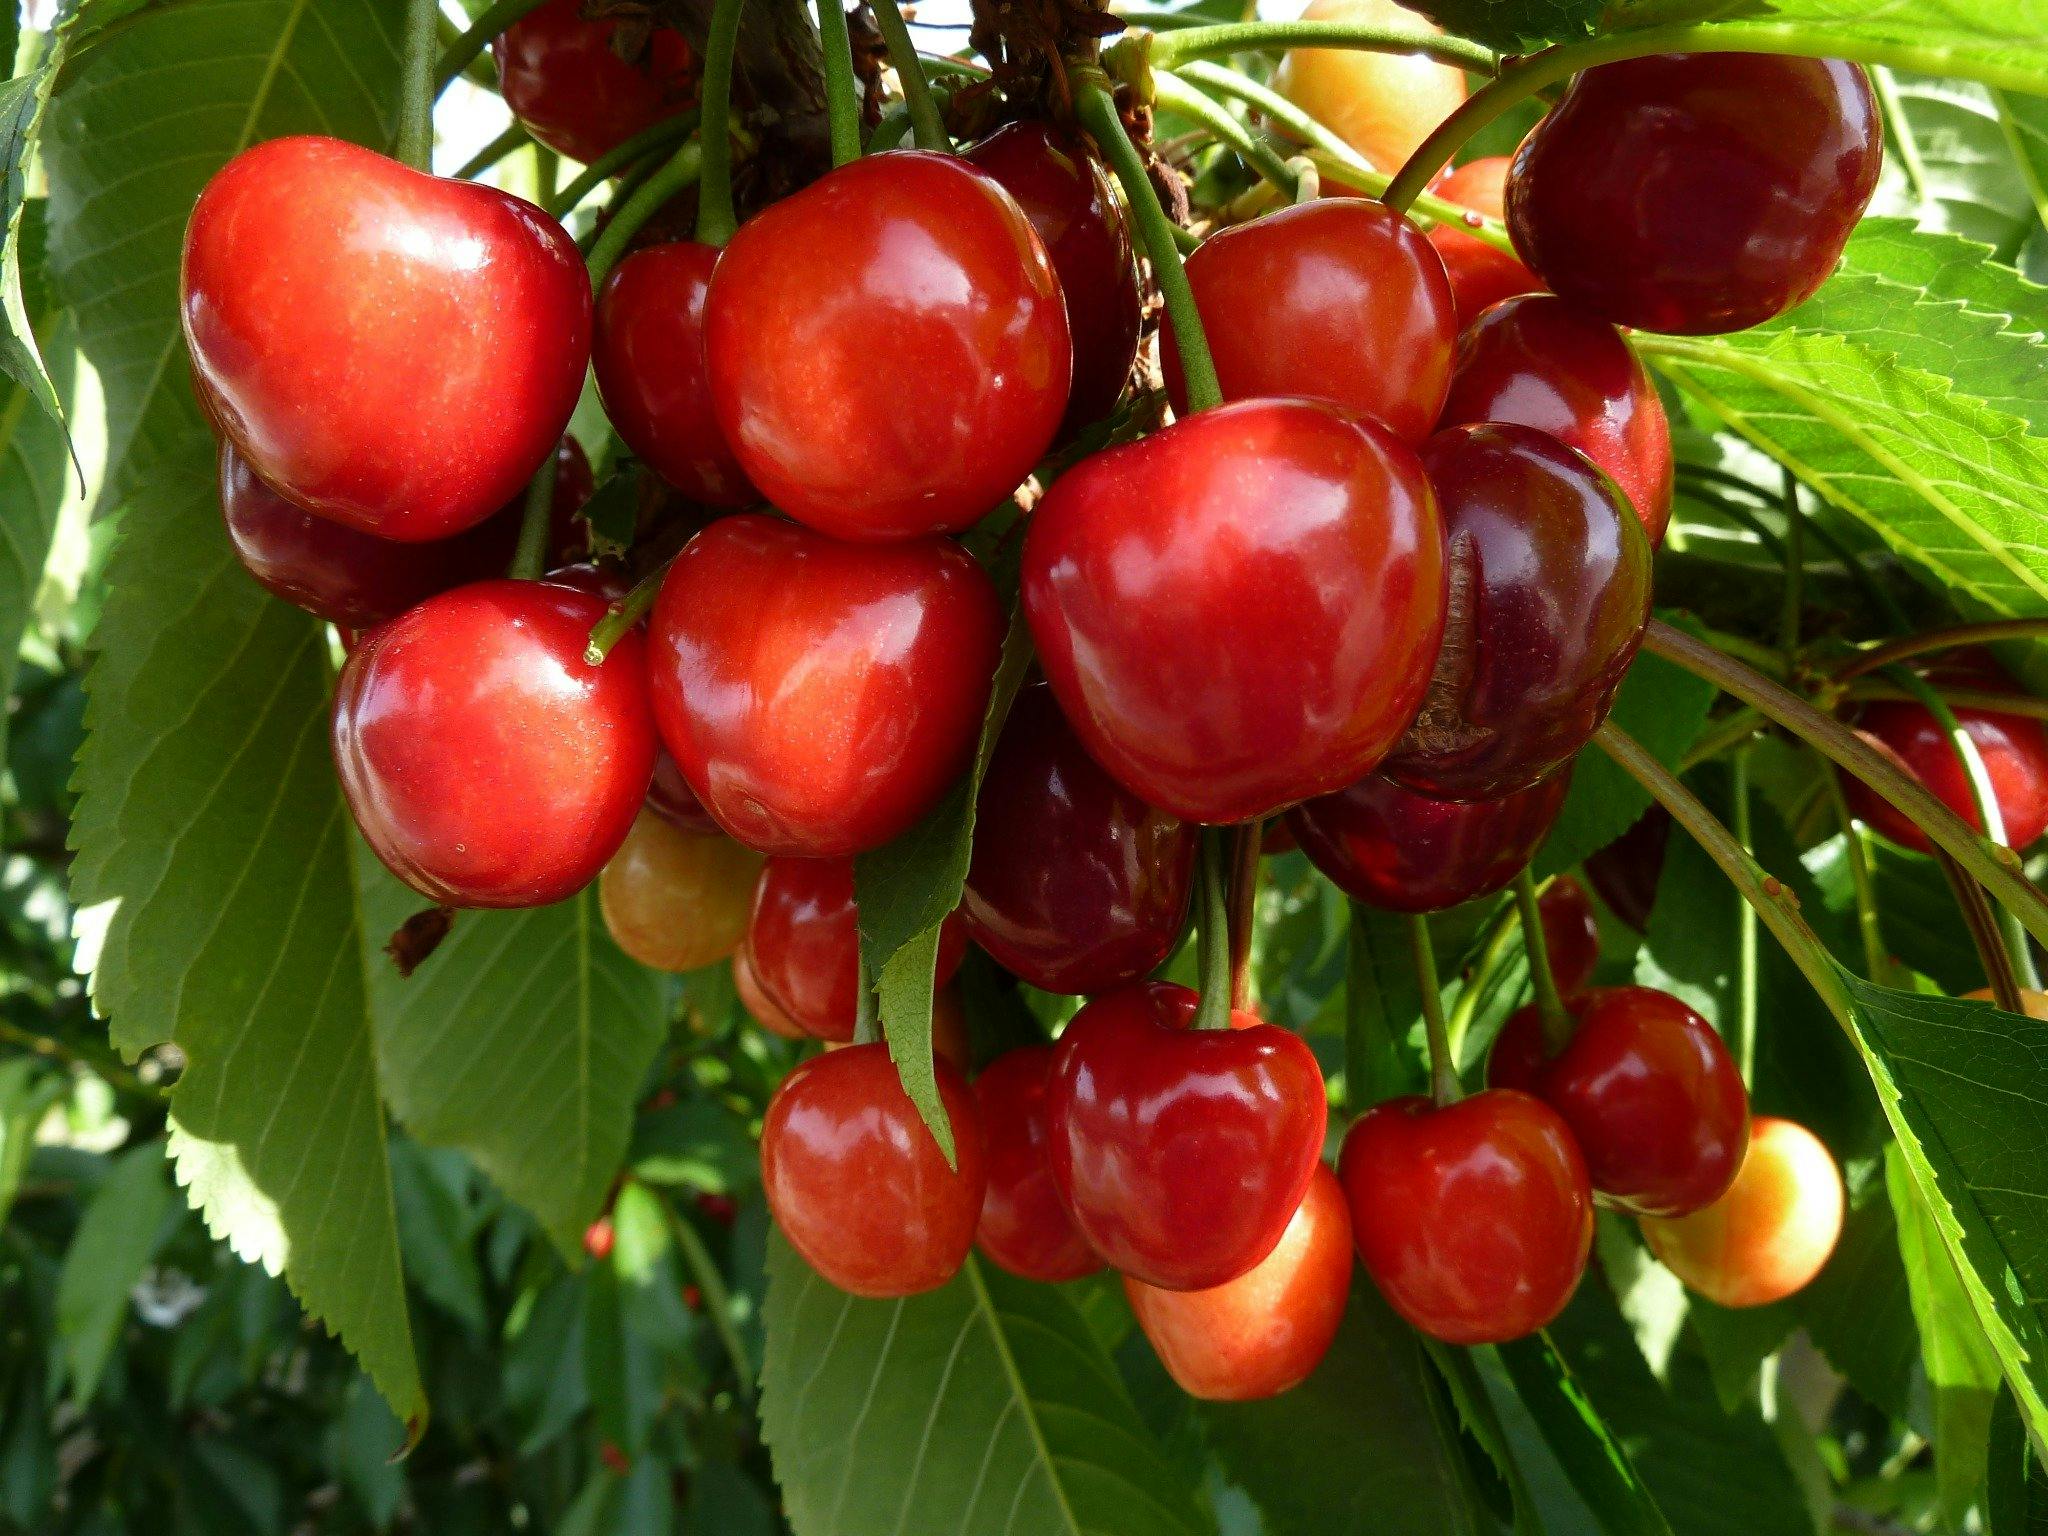 Cherries nearly ready for picking